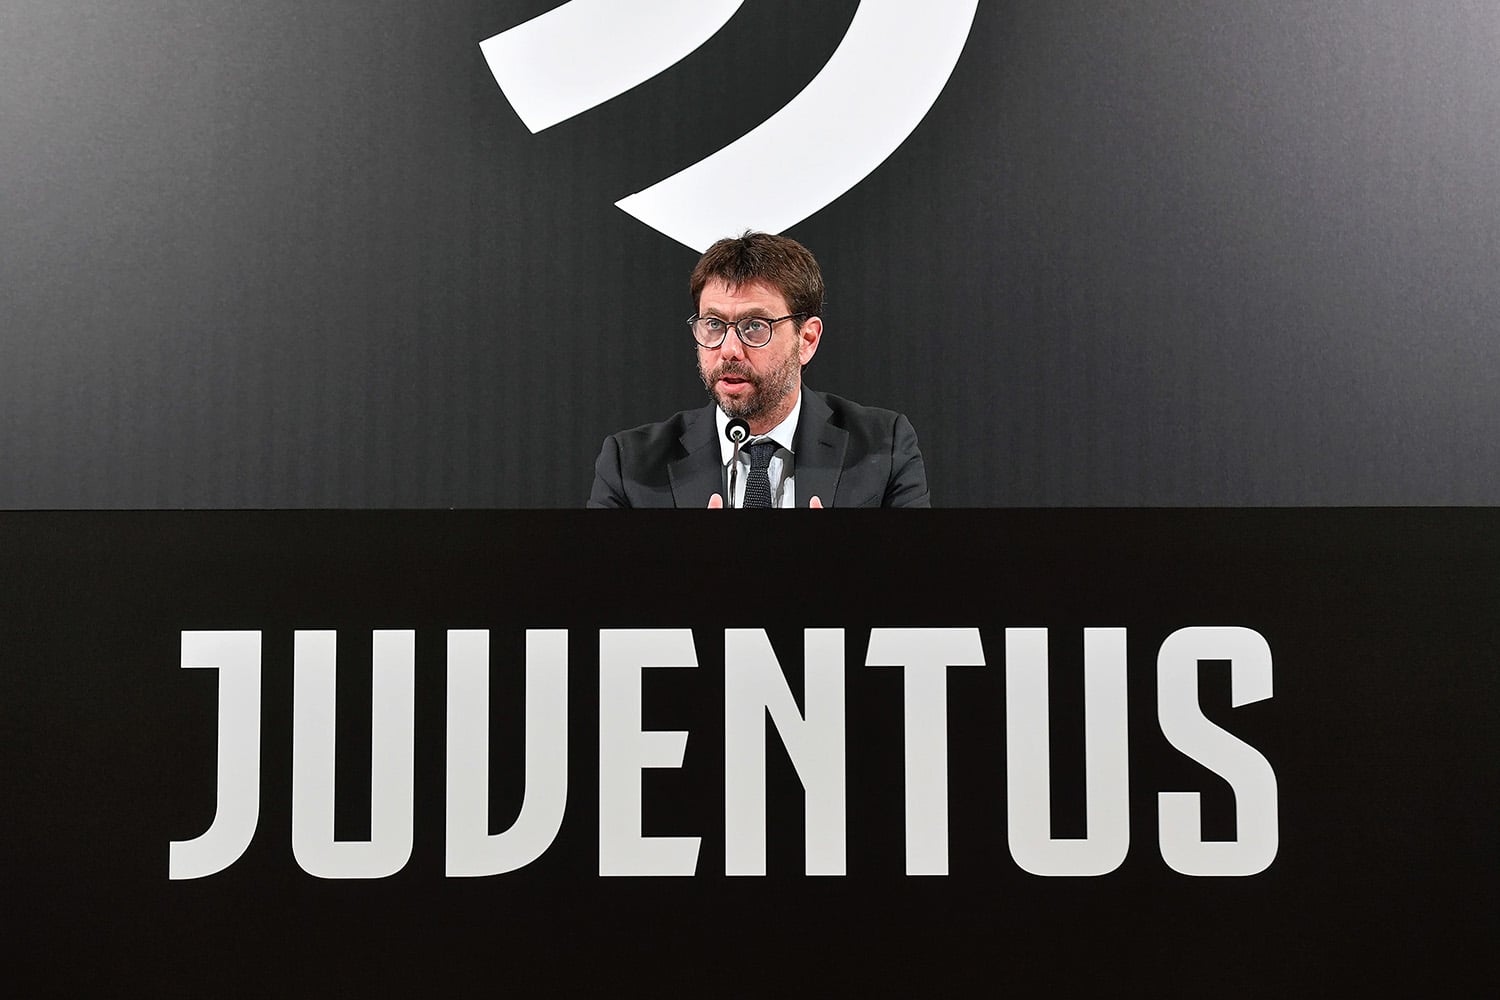 Former Juventus chairman Andrea Agnelli talking to media in front of team logo